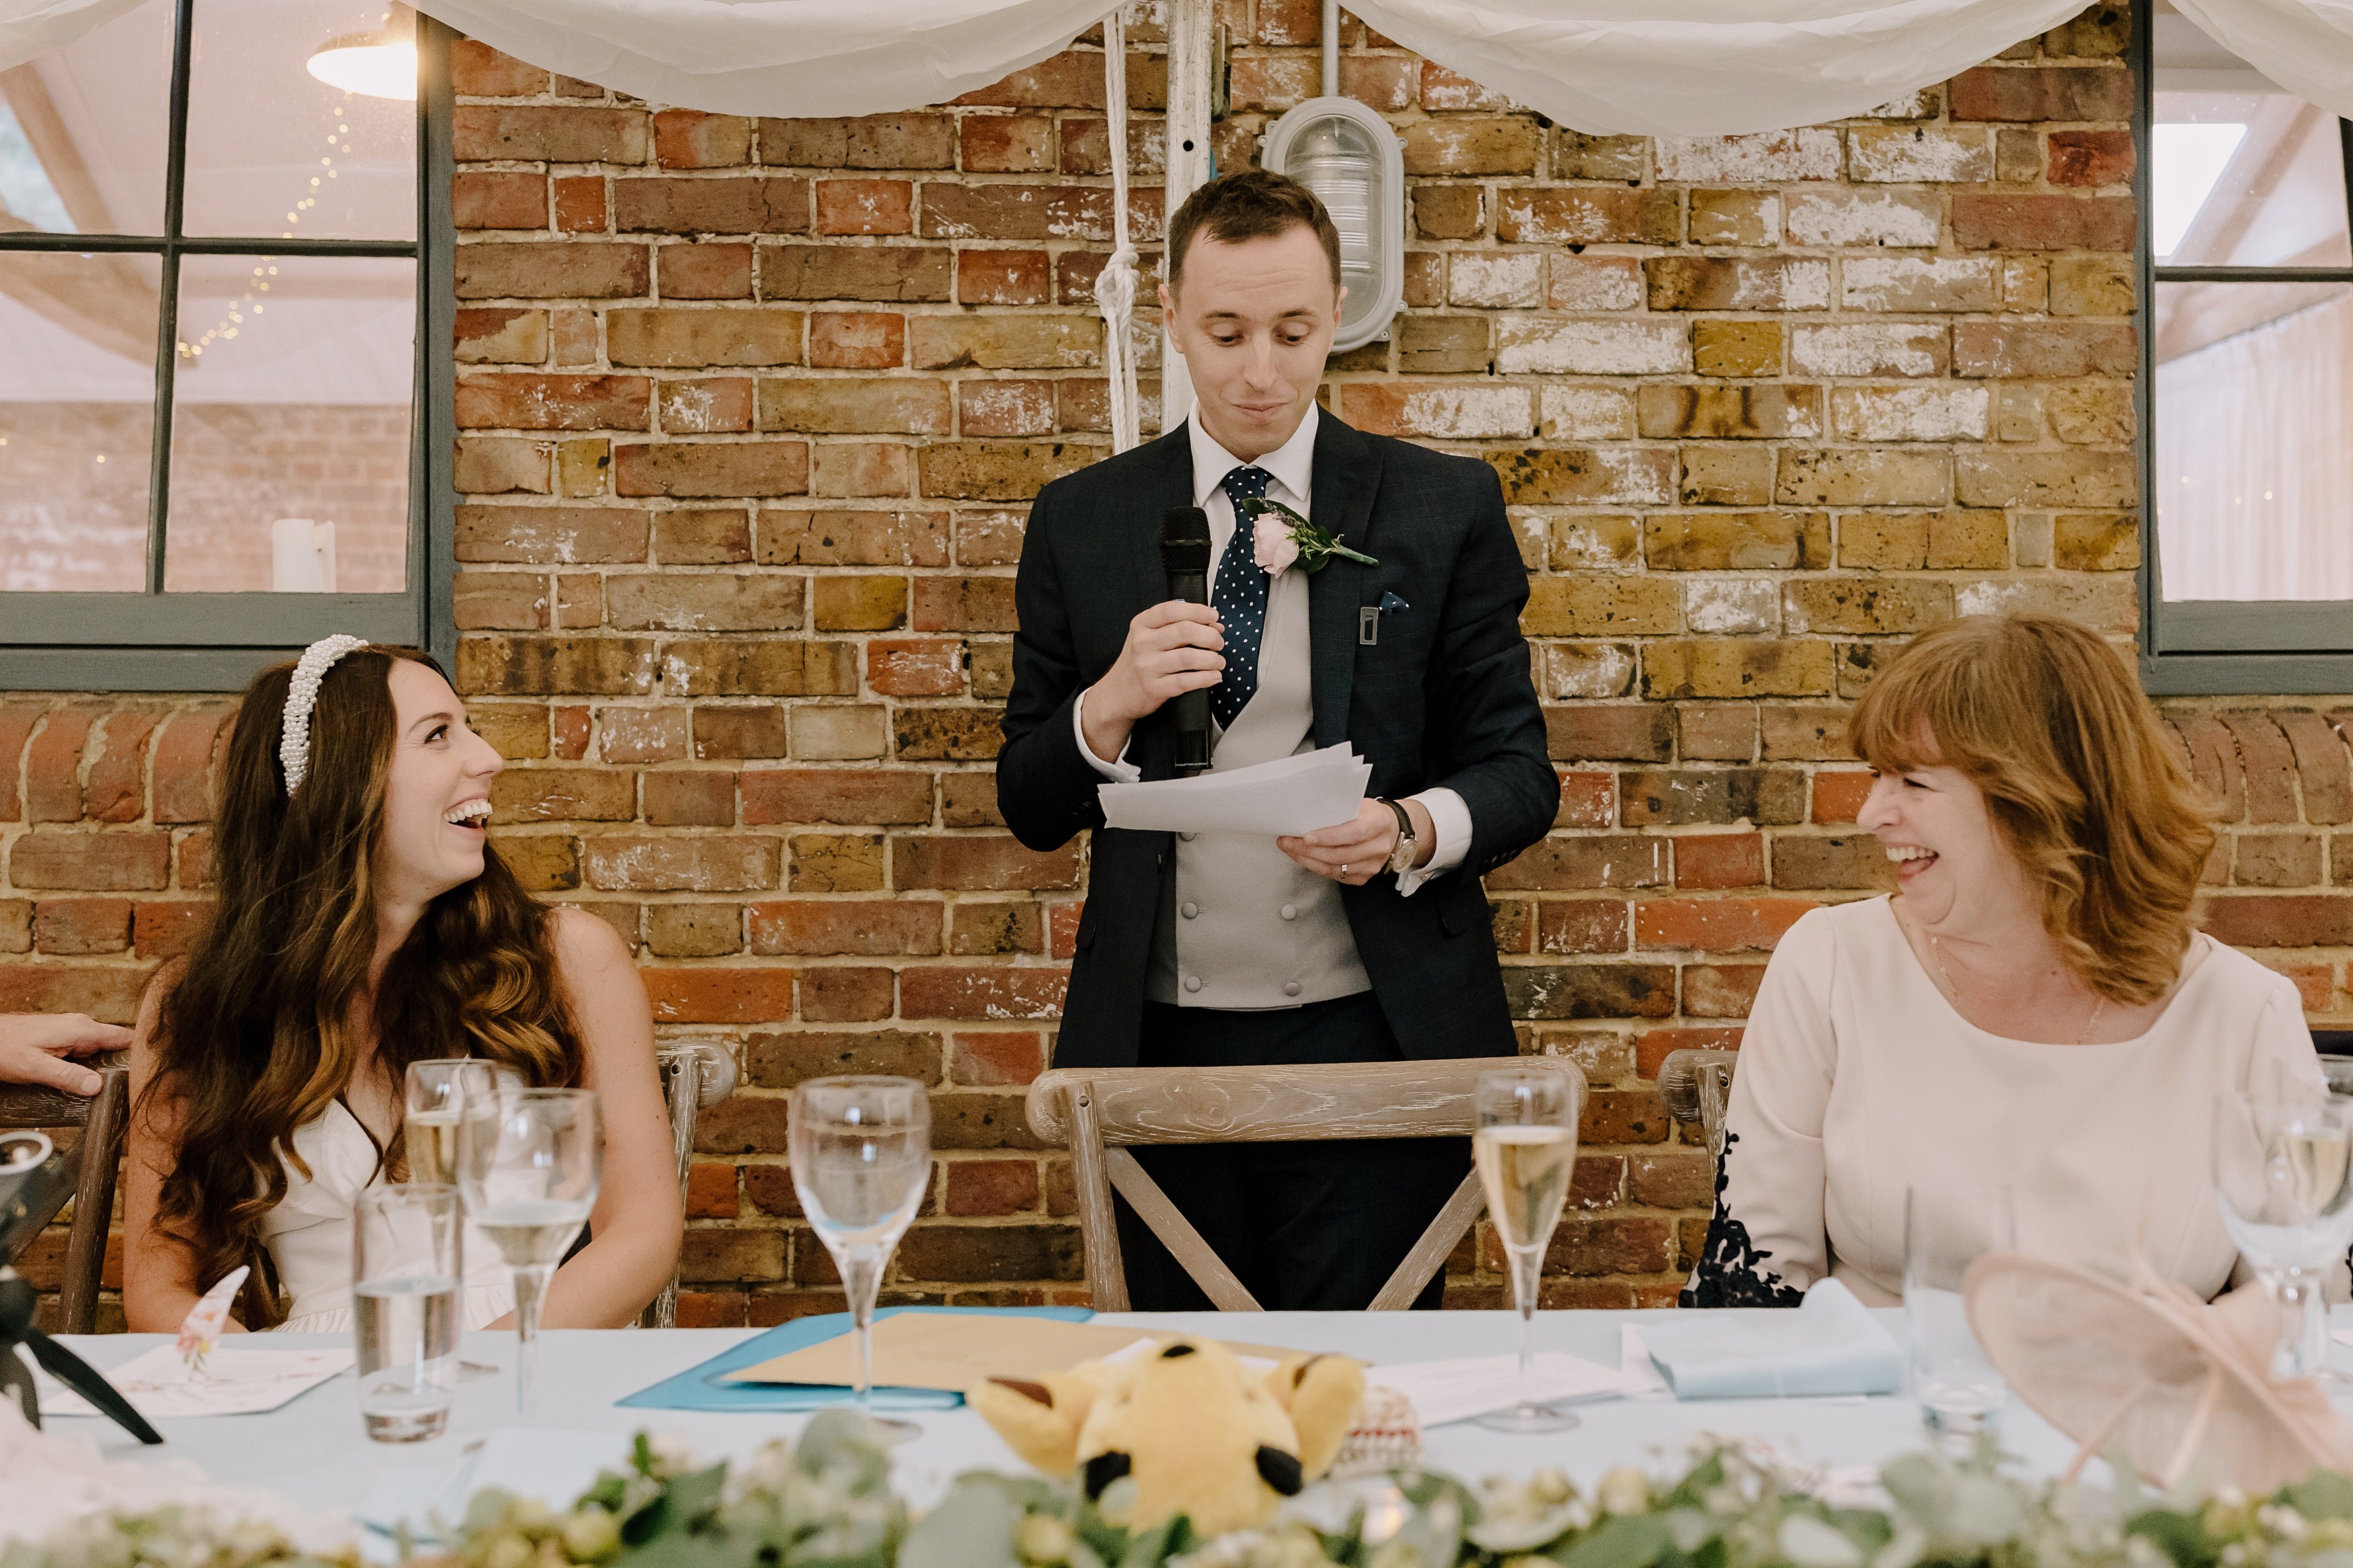 The groom making his wedding day speech with his mum and bride laughing either side